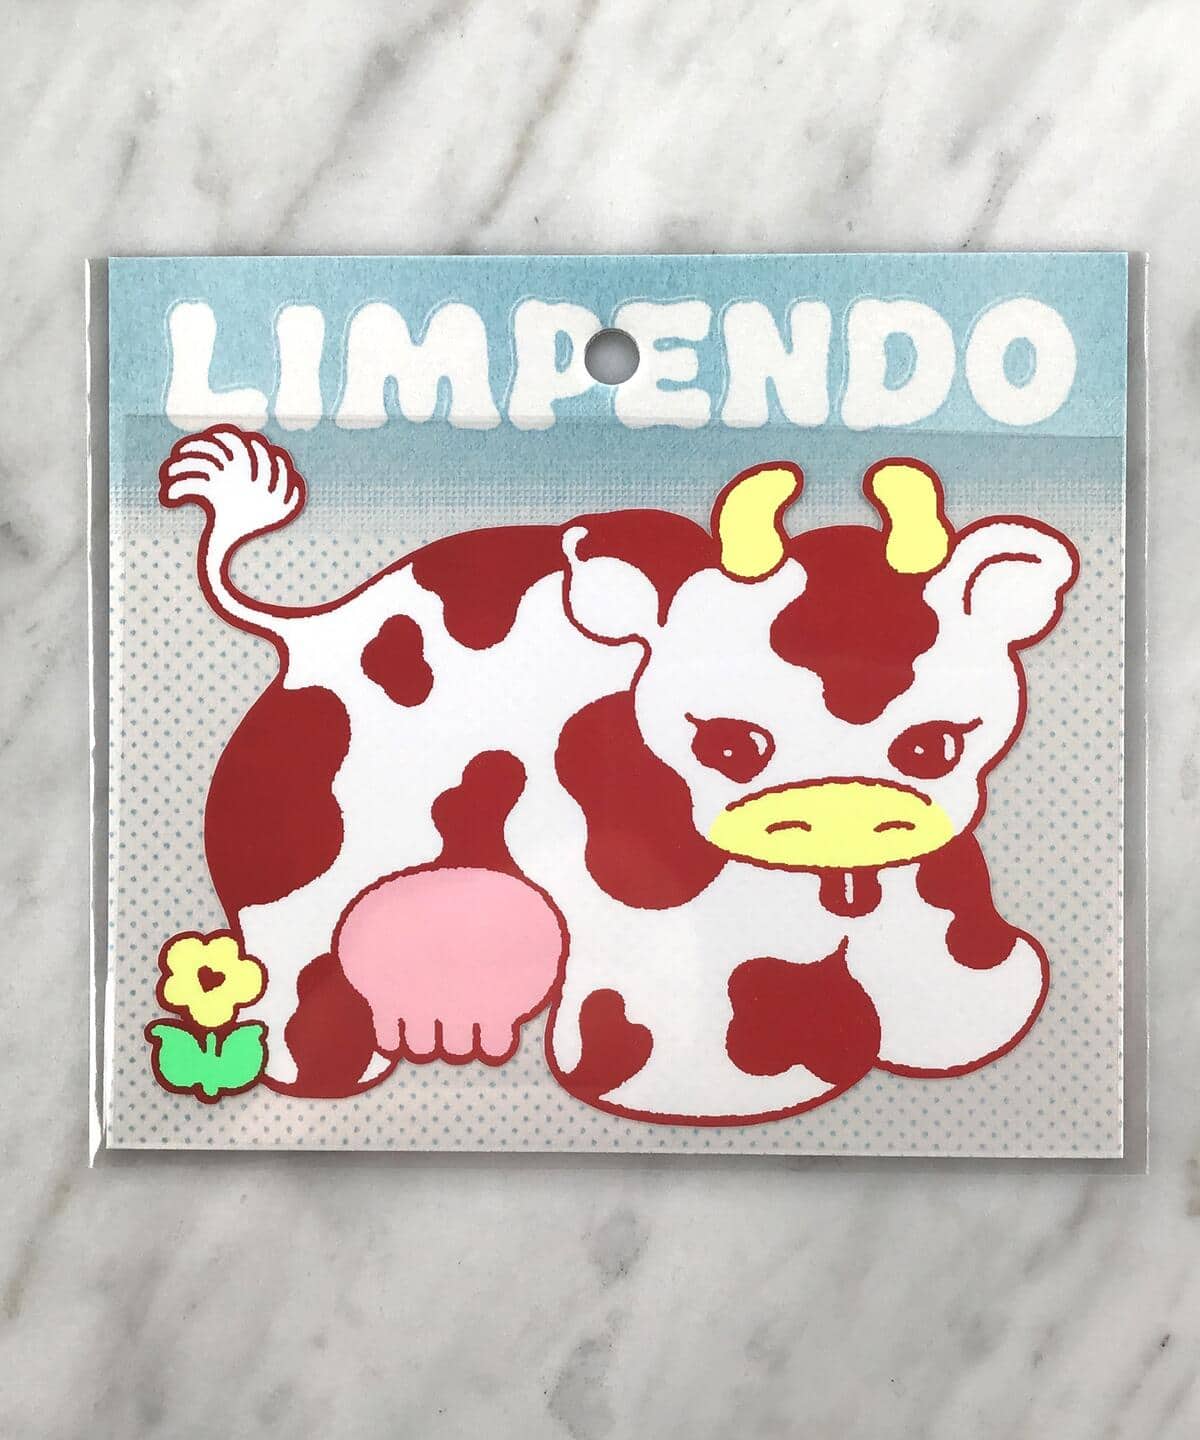 TOKYO CULTUART by BEAMS (TOKYO CULTUART by BEAMS) LIMPENDO x ancco / Cow  Sticker (M) (Miscellaneous Goods/Hobby Stationery) Mail Order | BEAMS